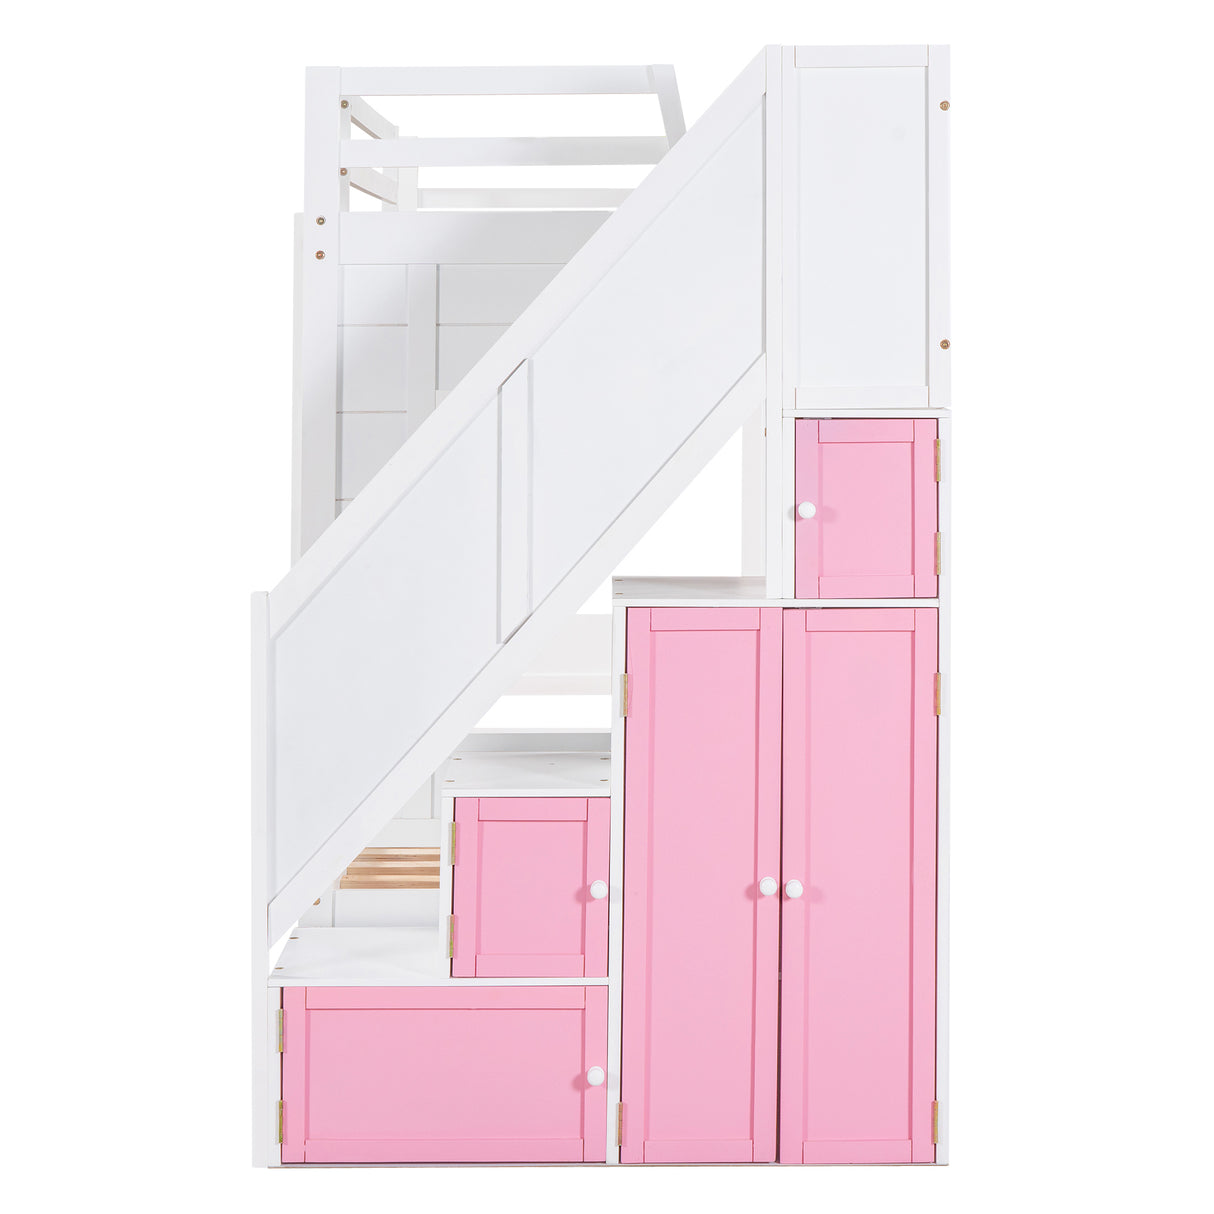 Twin Over Twin Bunk Bed with Trundle ,Stairs,Ladders Solid Wood Bunk bed with Storage Cabinet （White + Pink） - Home Elegance USA